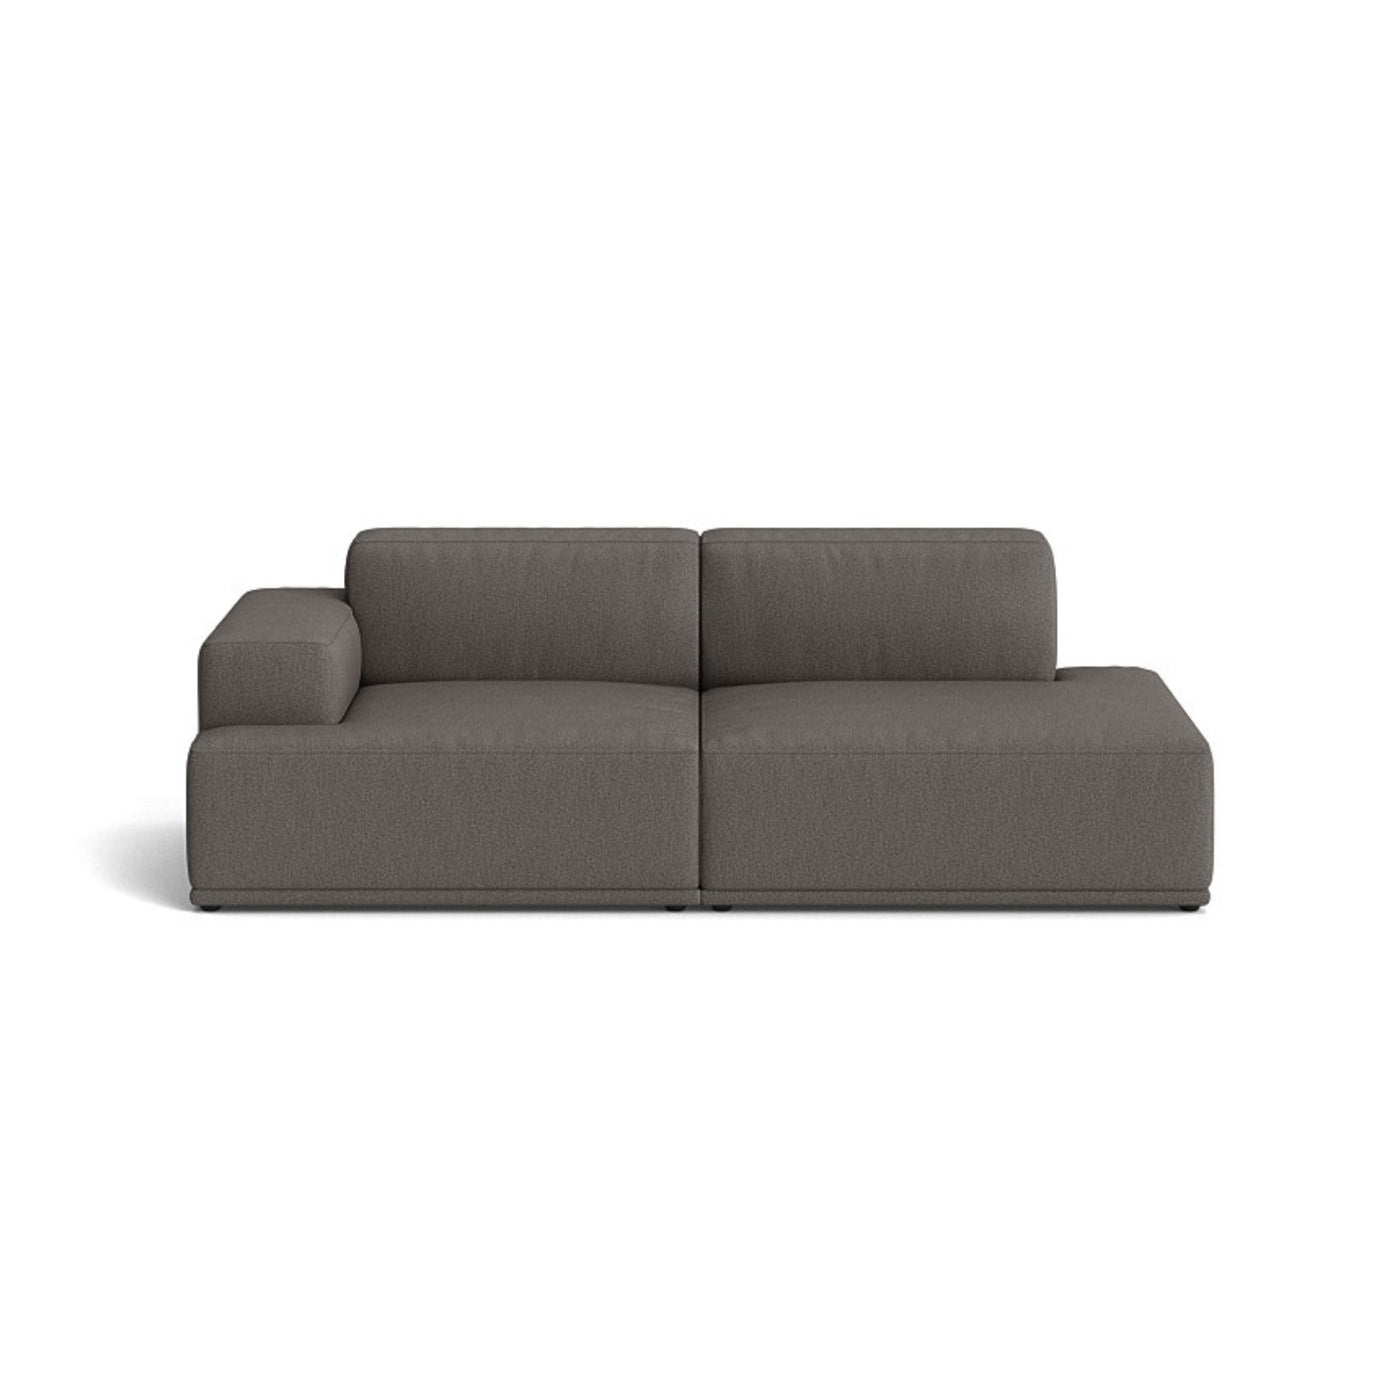 Muuto Connect Soft Modular 2 Seater Sofa, configuration 2. made-to-order from someday designs. #colour_clay-9